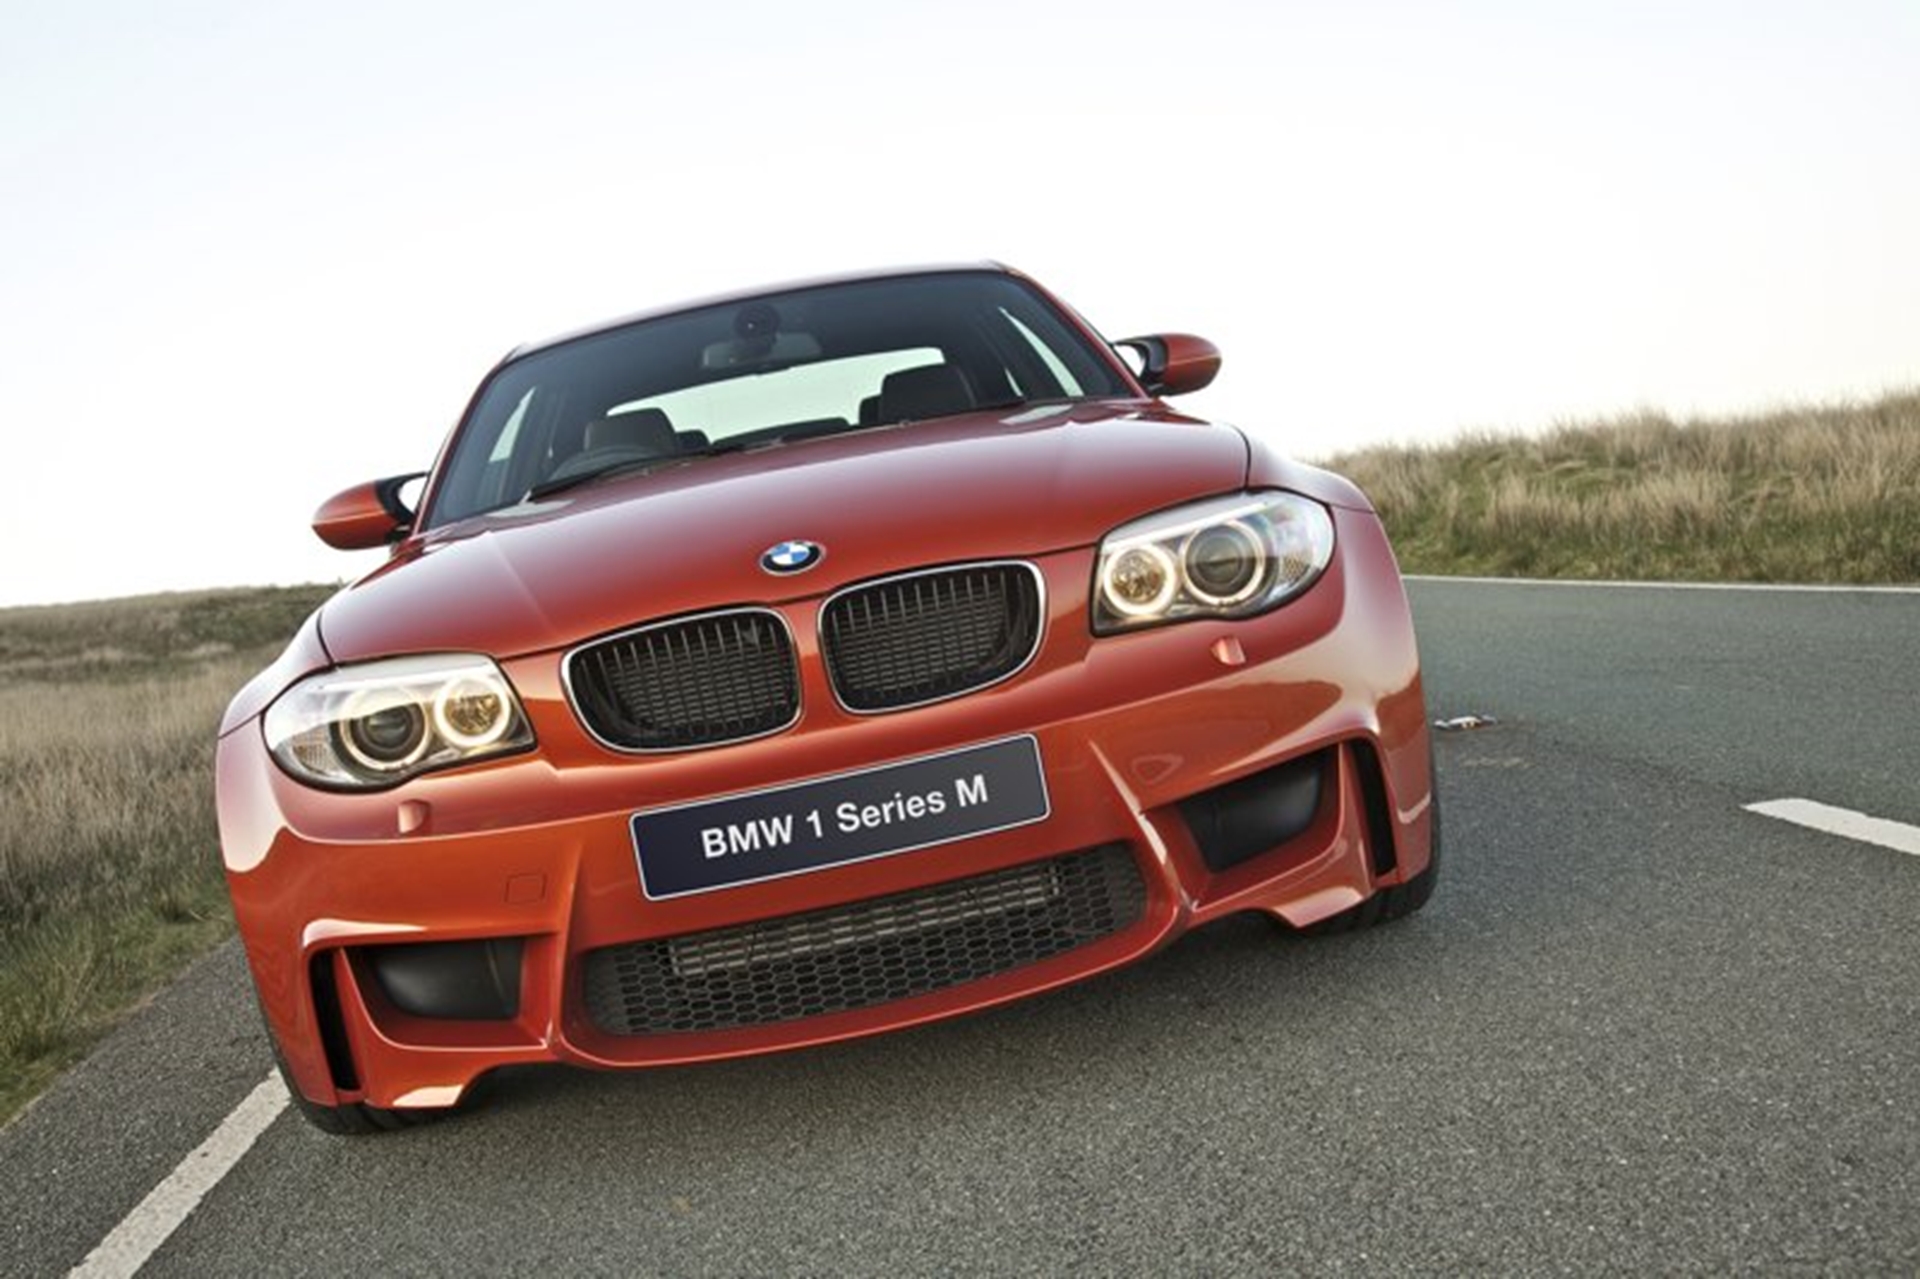 The new BMW 1 Series M Coupe